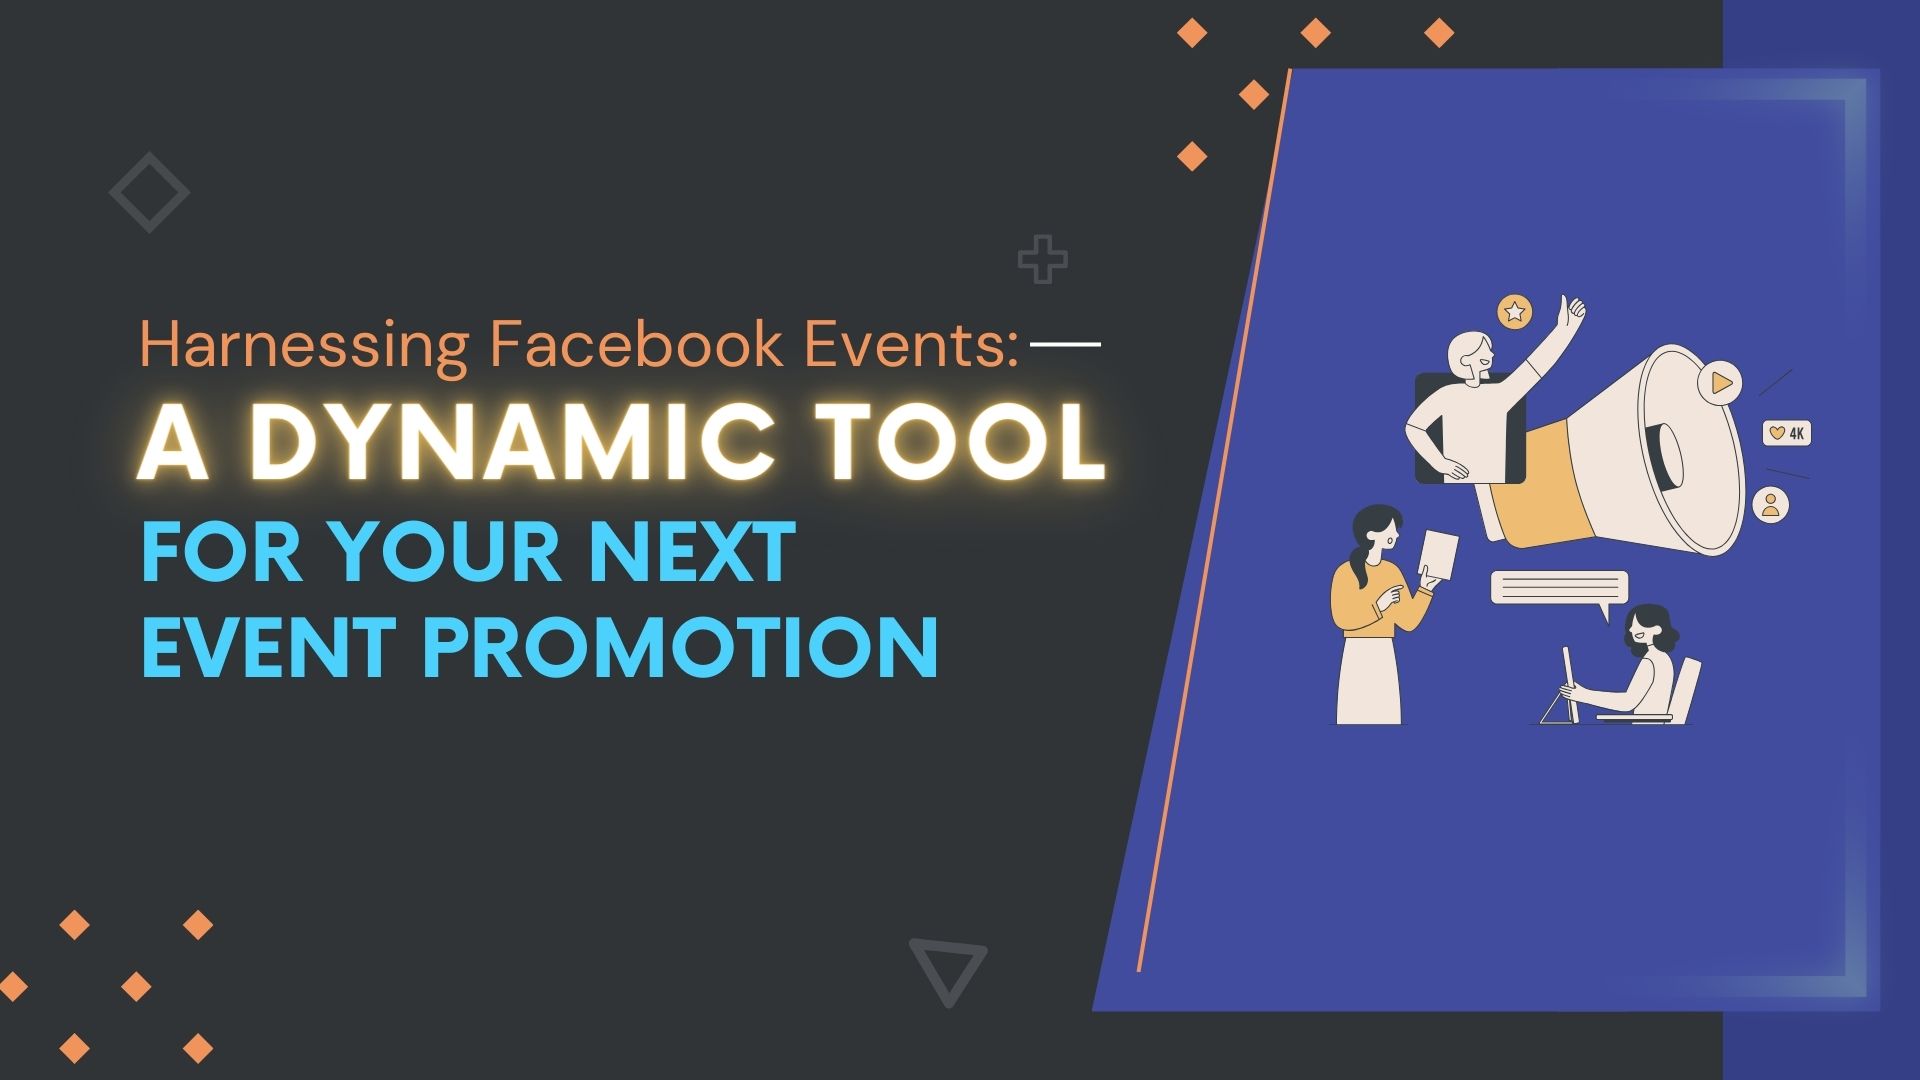 Harnessing Facebook Events: A Dynamic Tool for Your Next Event Promotion